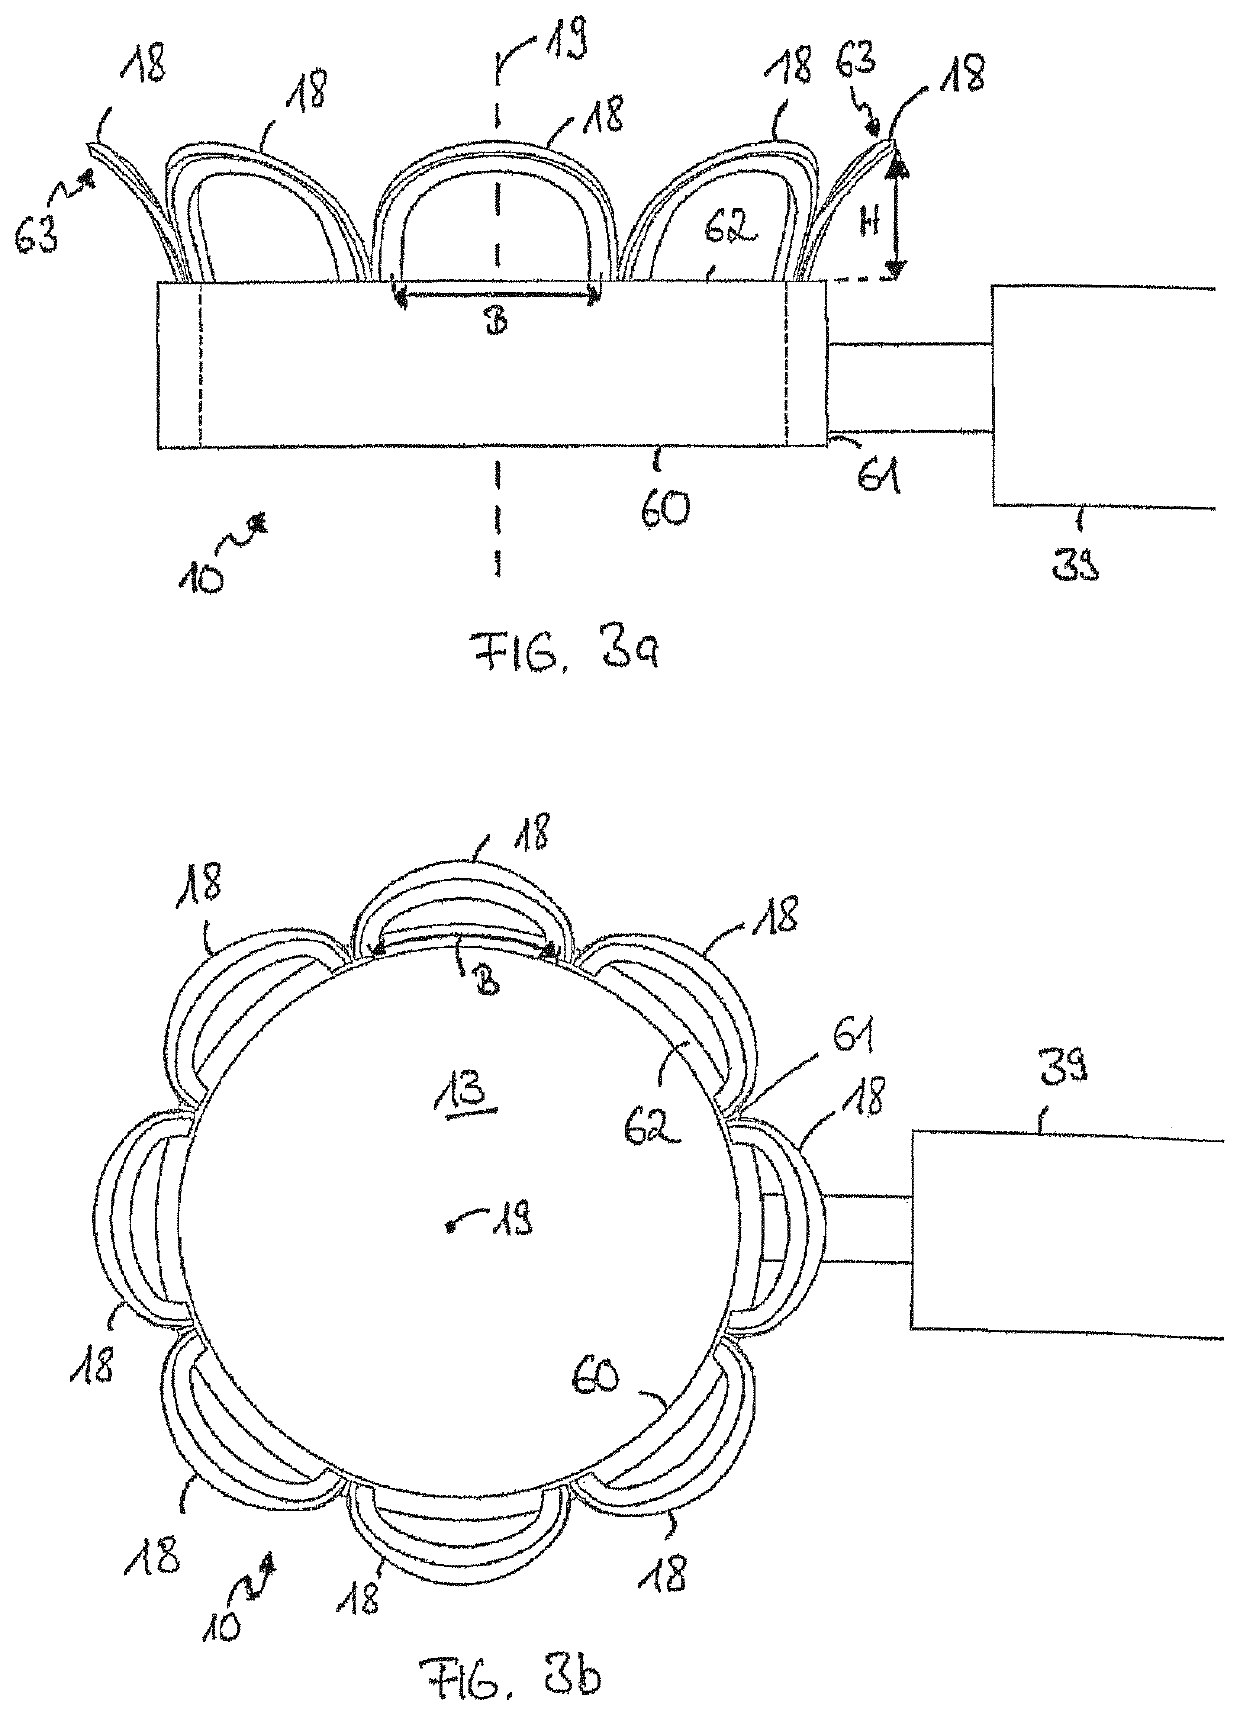 Device and method for cleaning espresso machines